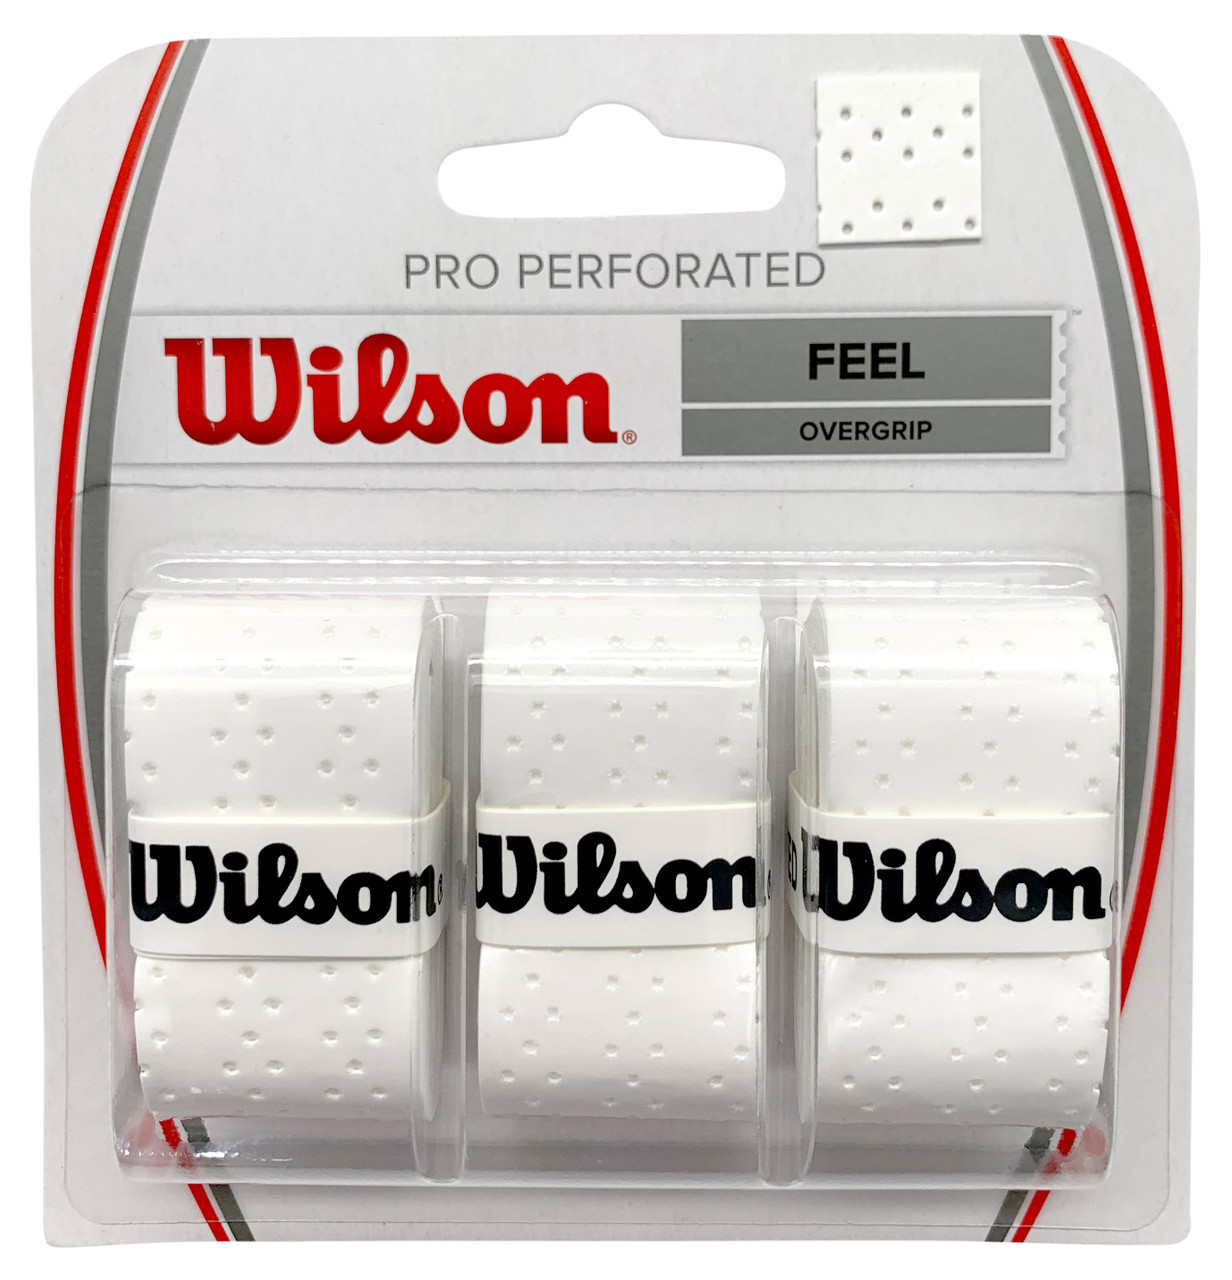 Wilson Pro Perforated 3-pack overgrip